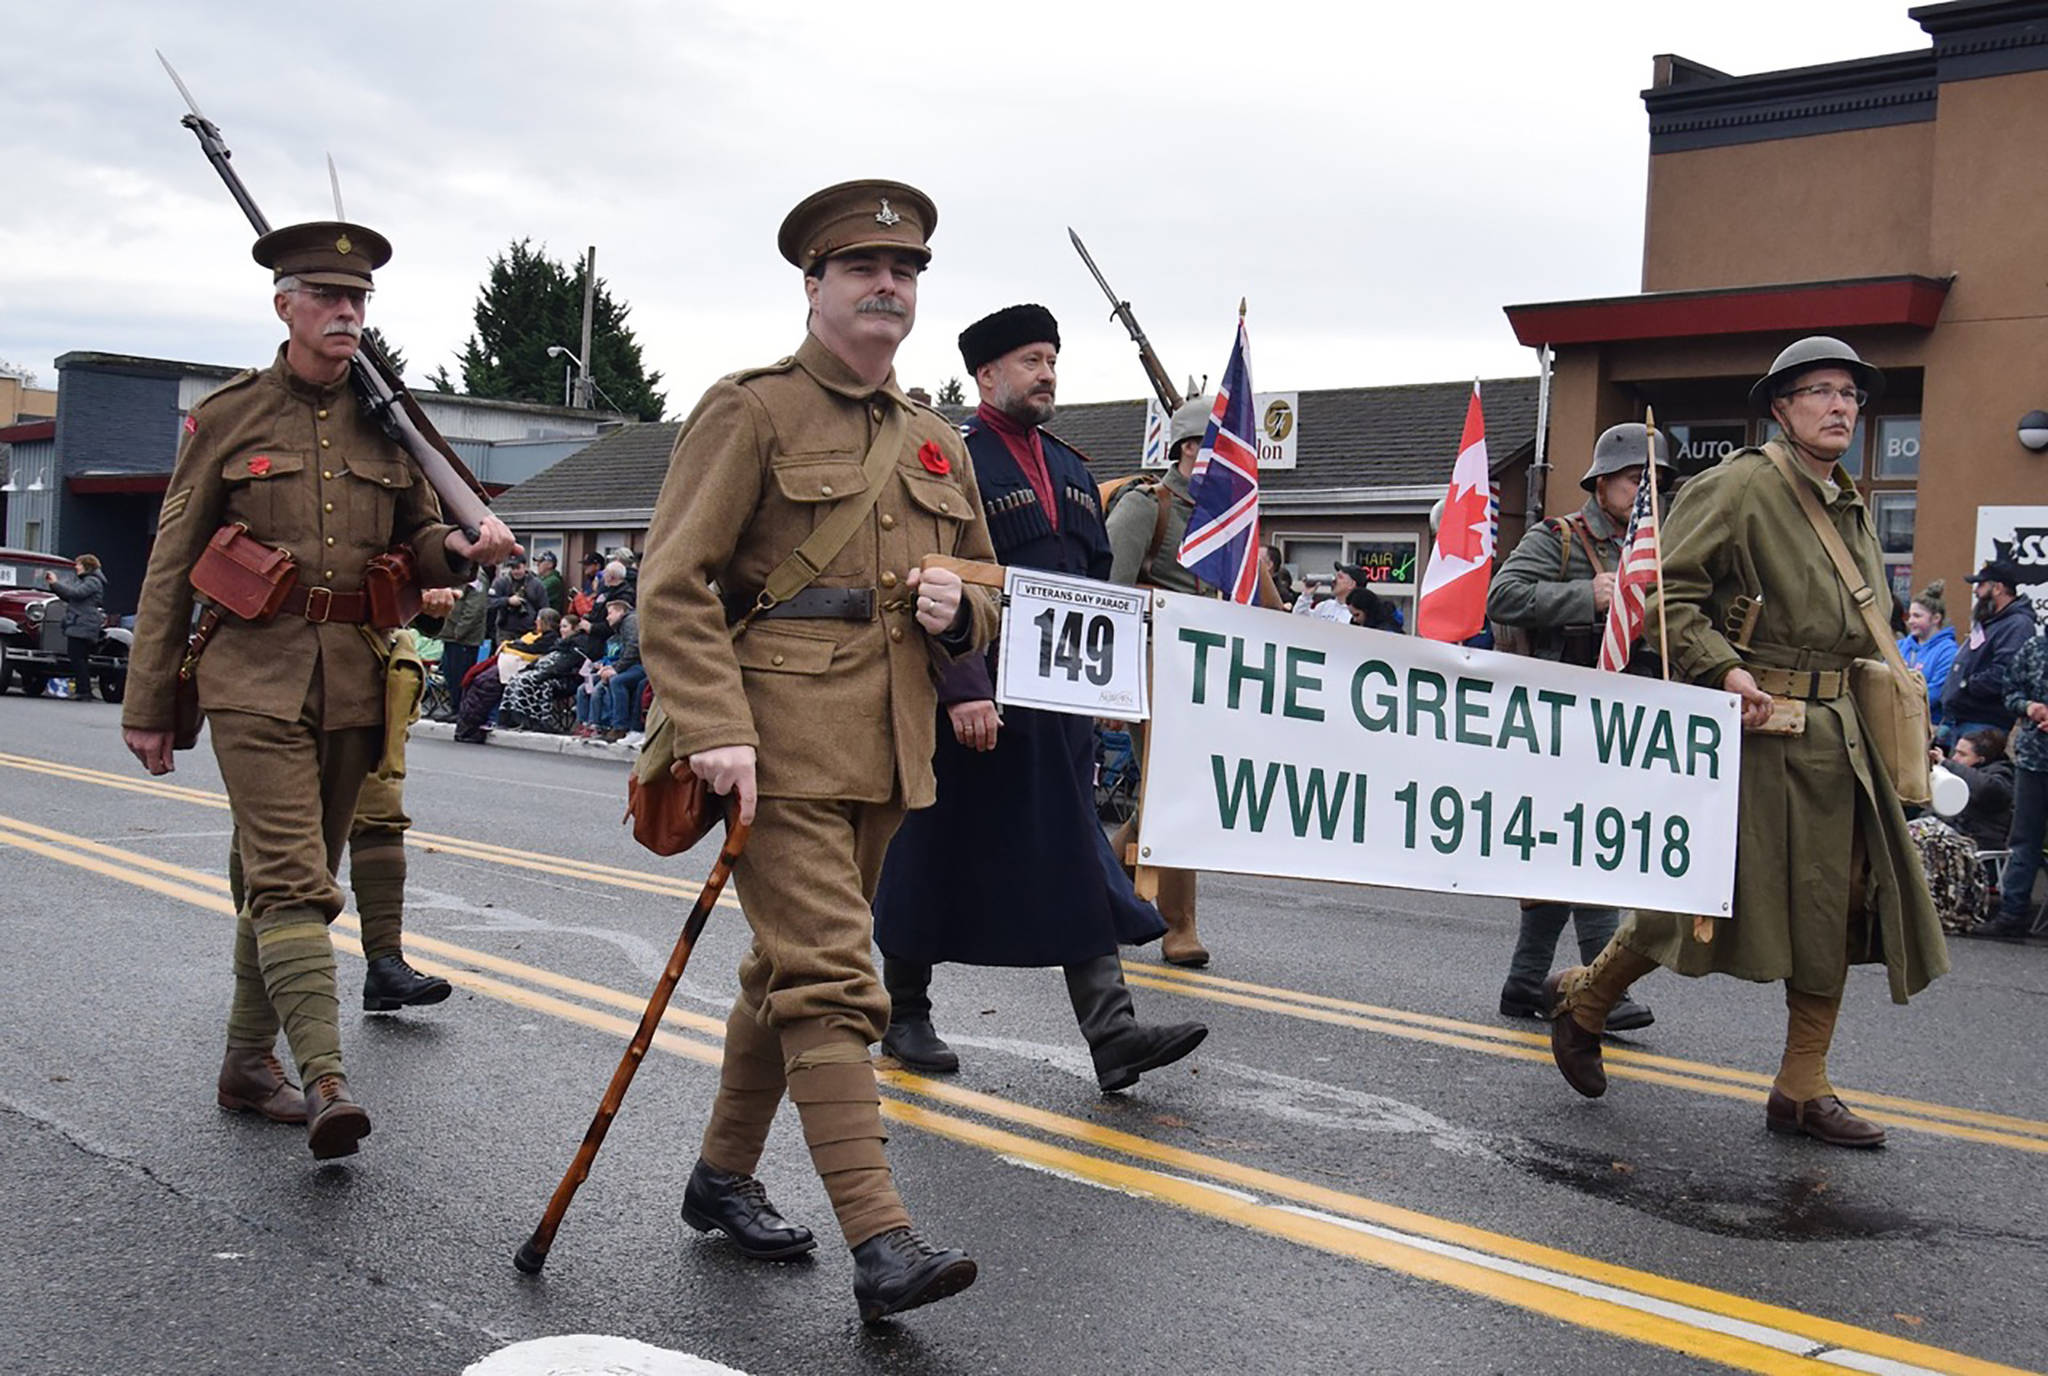 Soldiers dressed in World War I uniforms march down Main Street on Saturday. The parade featured more than 200 entries and nearly 6,000 parade participants showcasing American strength of will, endurance and purpose. RACHEL CIAMPI, Auburn Reporter